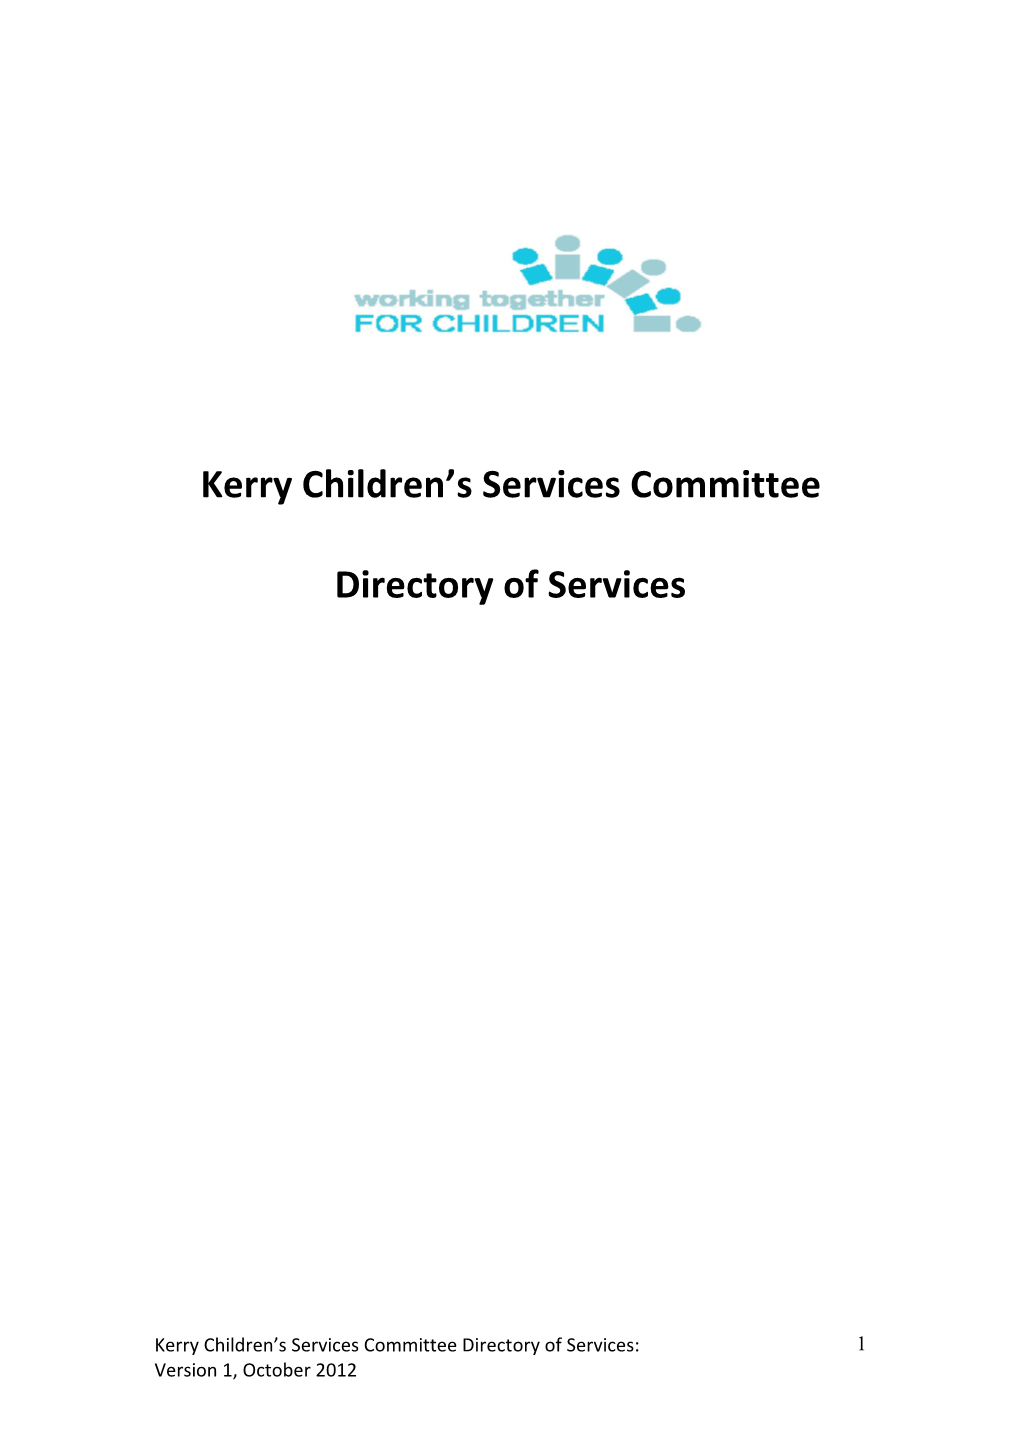 Kerry Children and Young Peoples Services Committee Directory Of